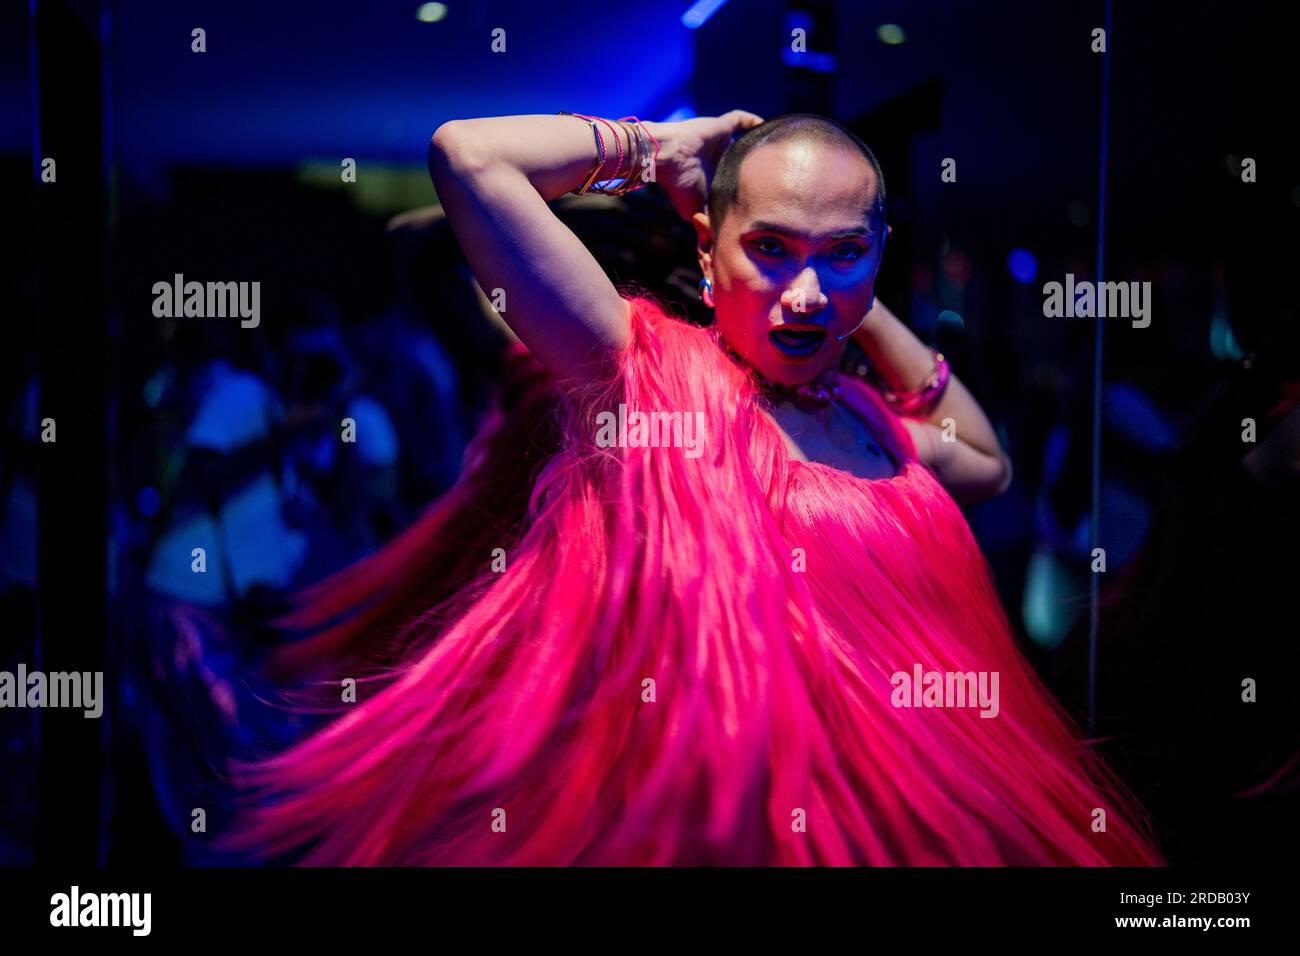 Bangkok, Thailand. 20th July, 2023. PATCHA gets ready to perform backstage at the 'Barbie' movie premiere in Bangkok. Fans and artists attend the exclusive pink carpet premiere of 'Barbie' at Siam Paragon Cineplex on July 19, 2023. Credit: Matt Hunt/Neato/Alamy Live News Stock Photo